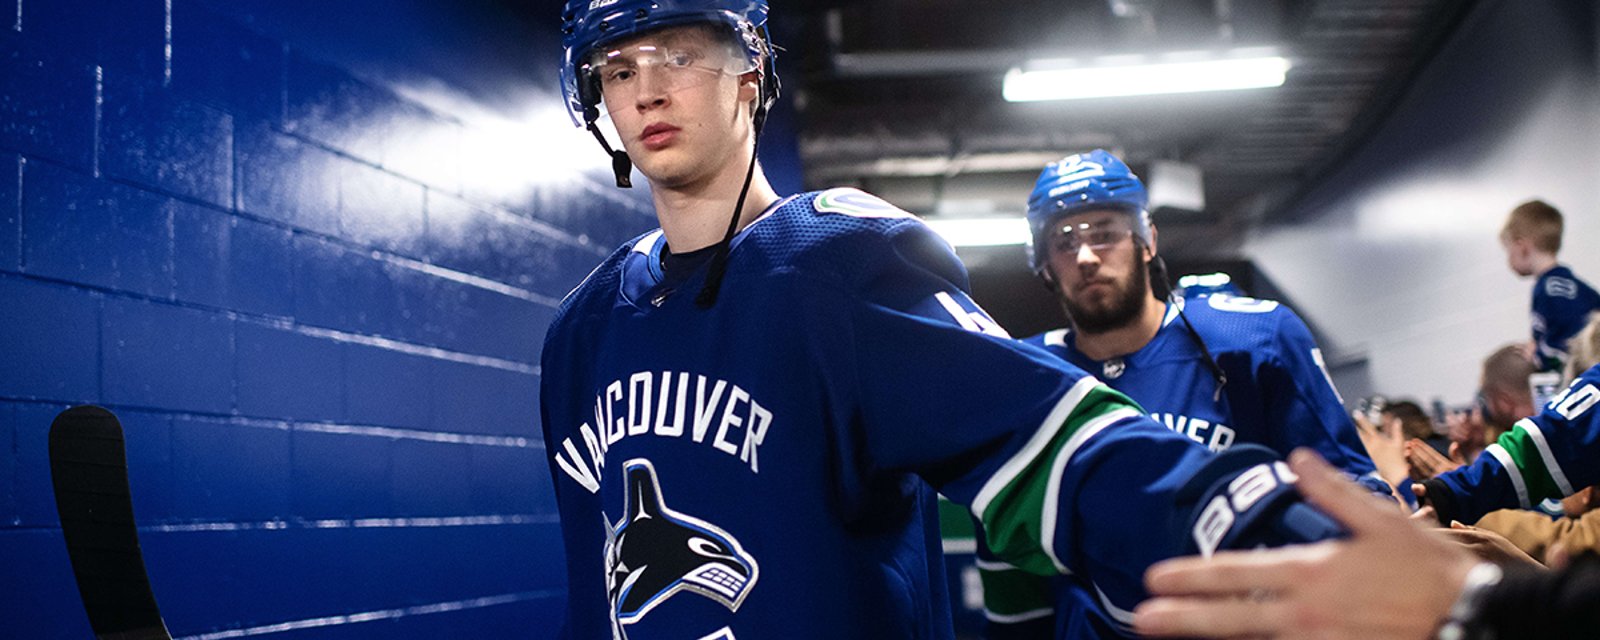 Canucks rookie Pettersson earns $425,000 in one day